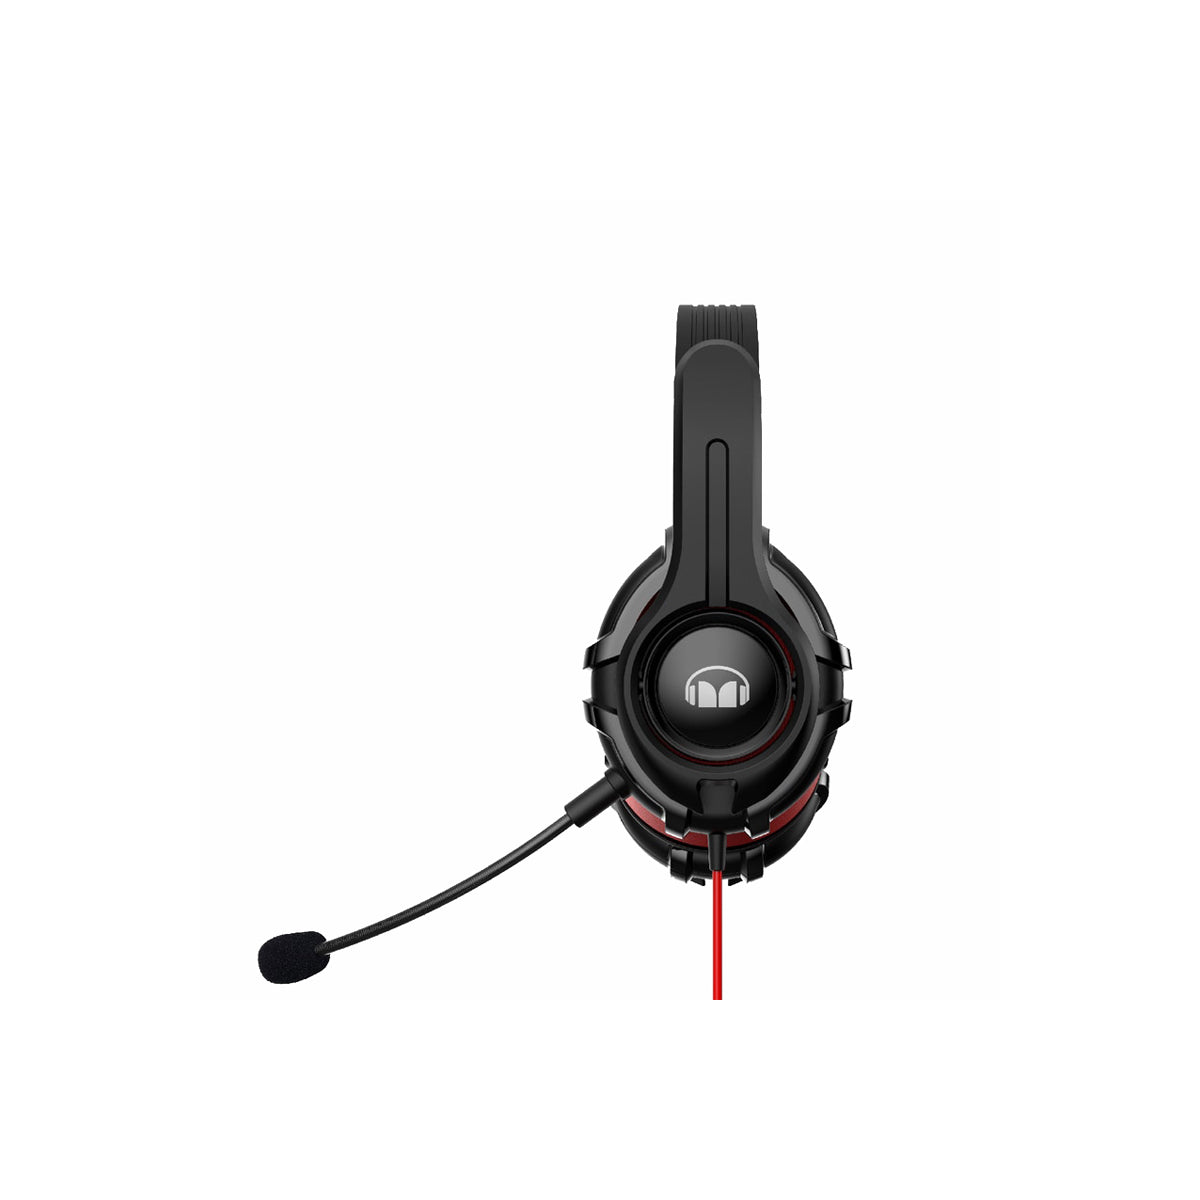 MONSTER Knight X300 Gaming Headset